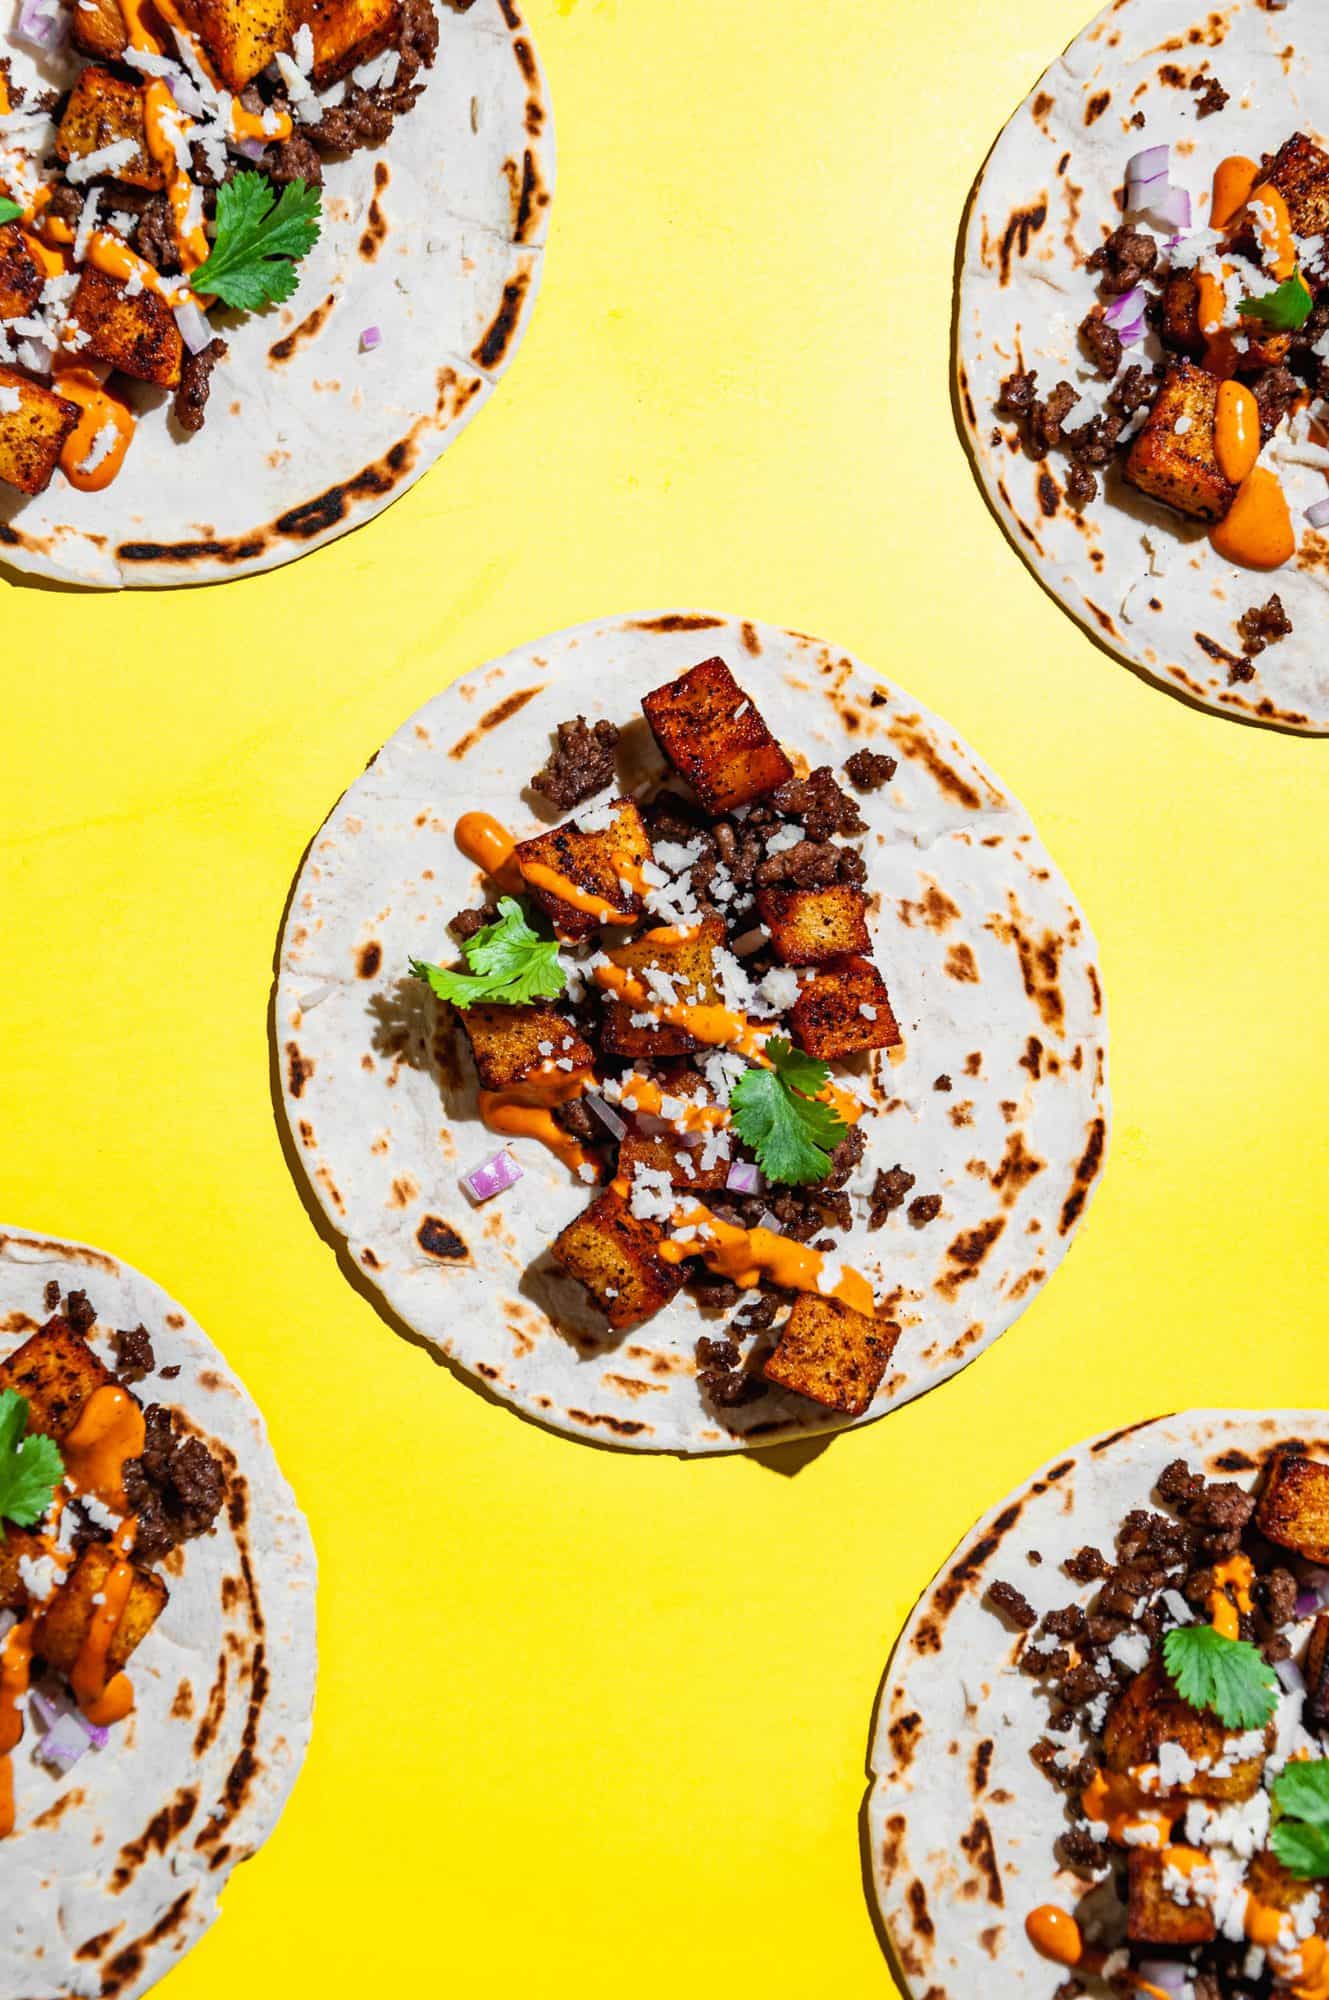 Close up overhead shot of a crispy potato soft taco with ground beef and other garnishes on a bright yellow background. Taco is framed by 4 other potato tacos in 4 corners of the frame. 